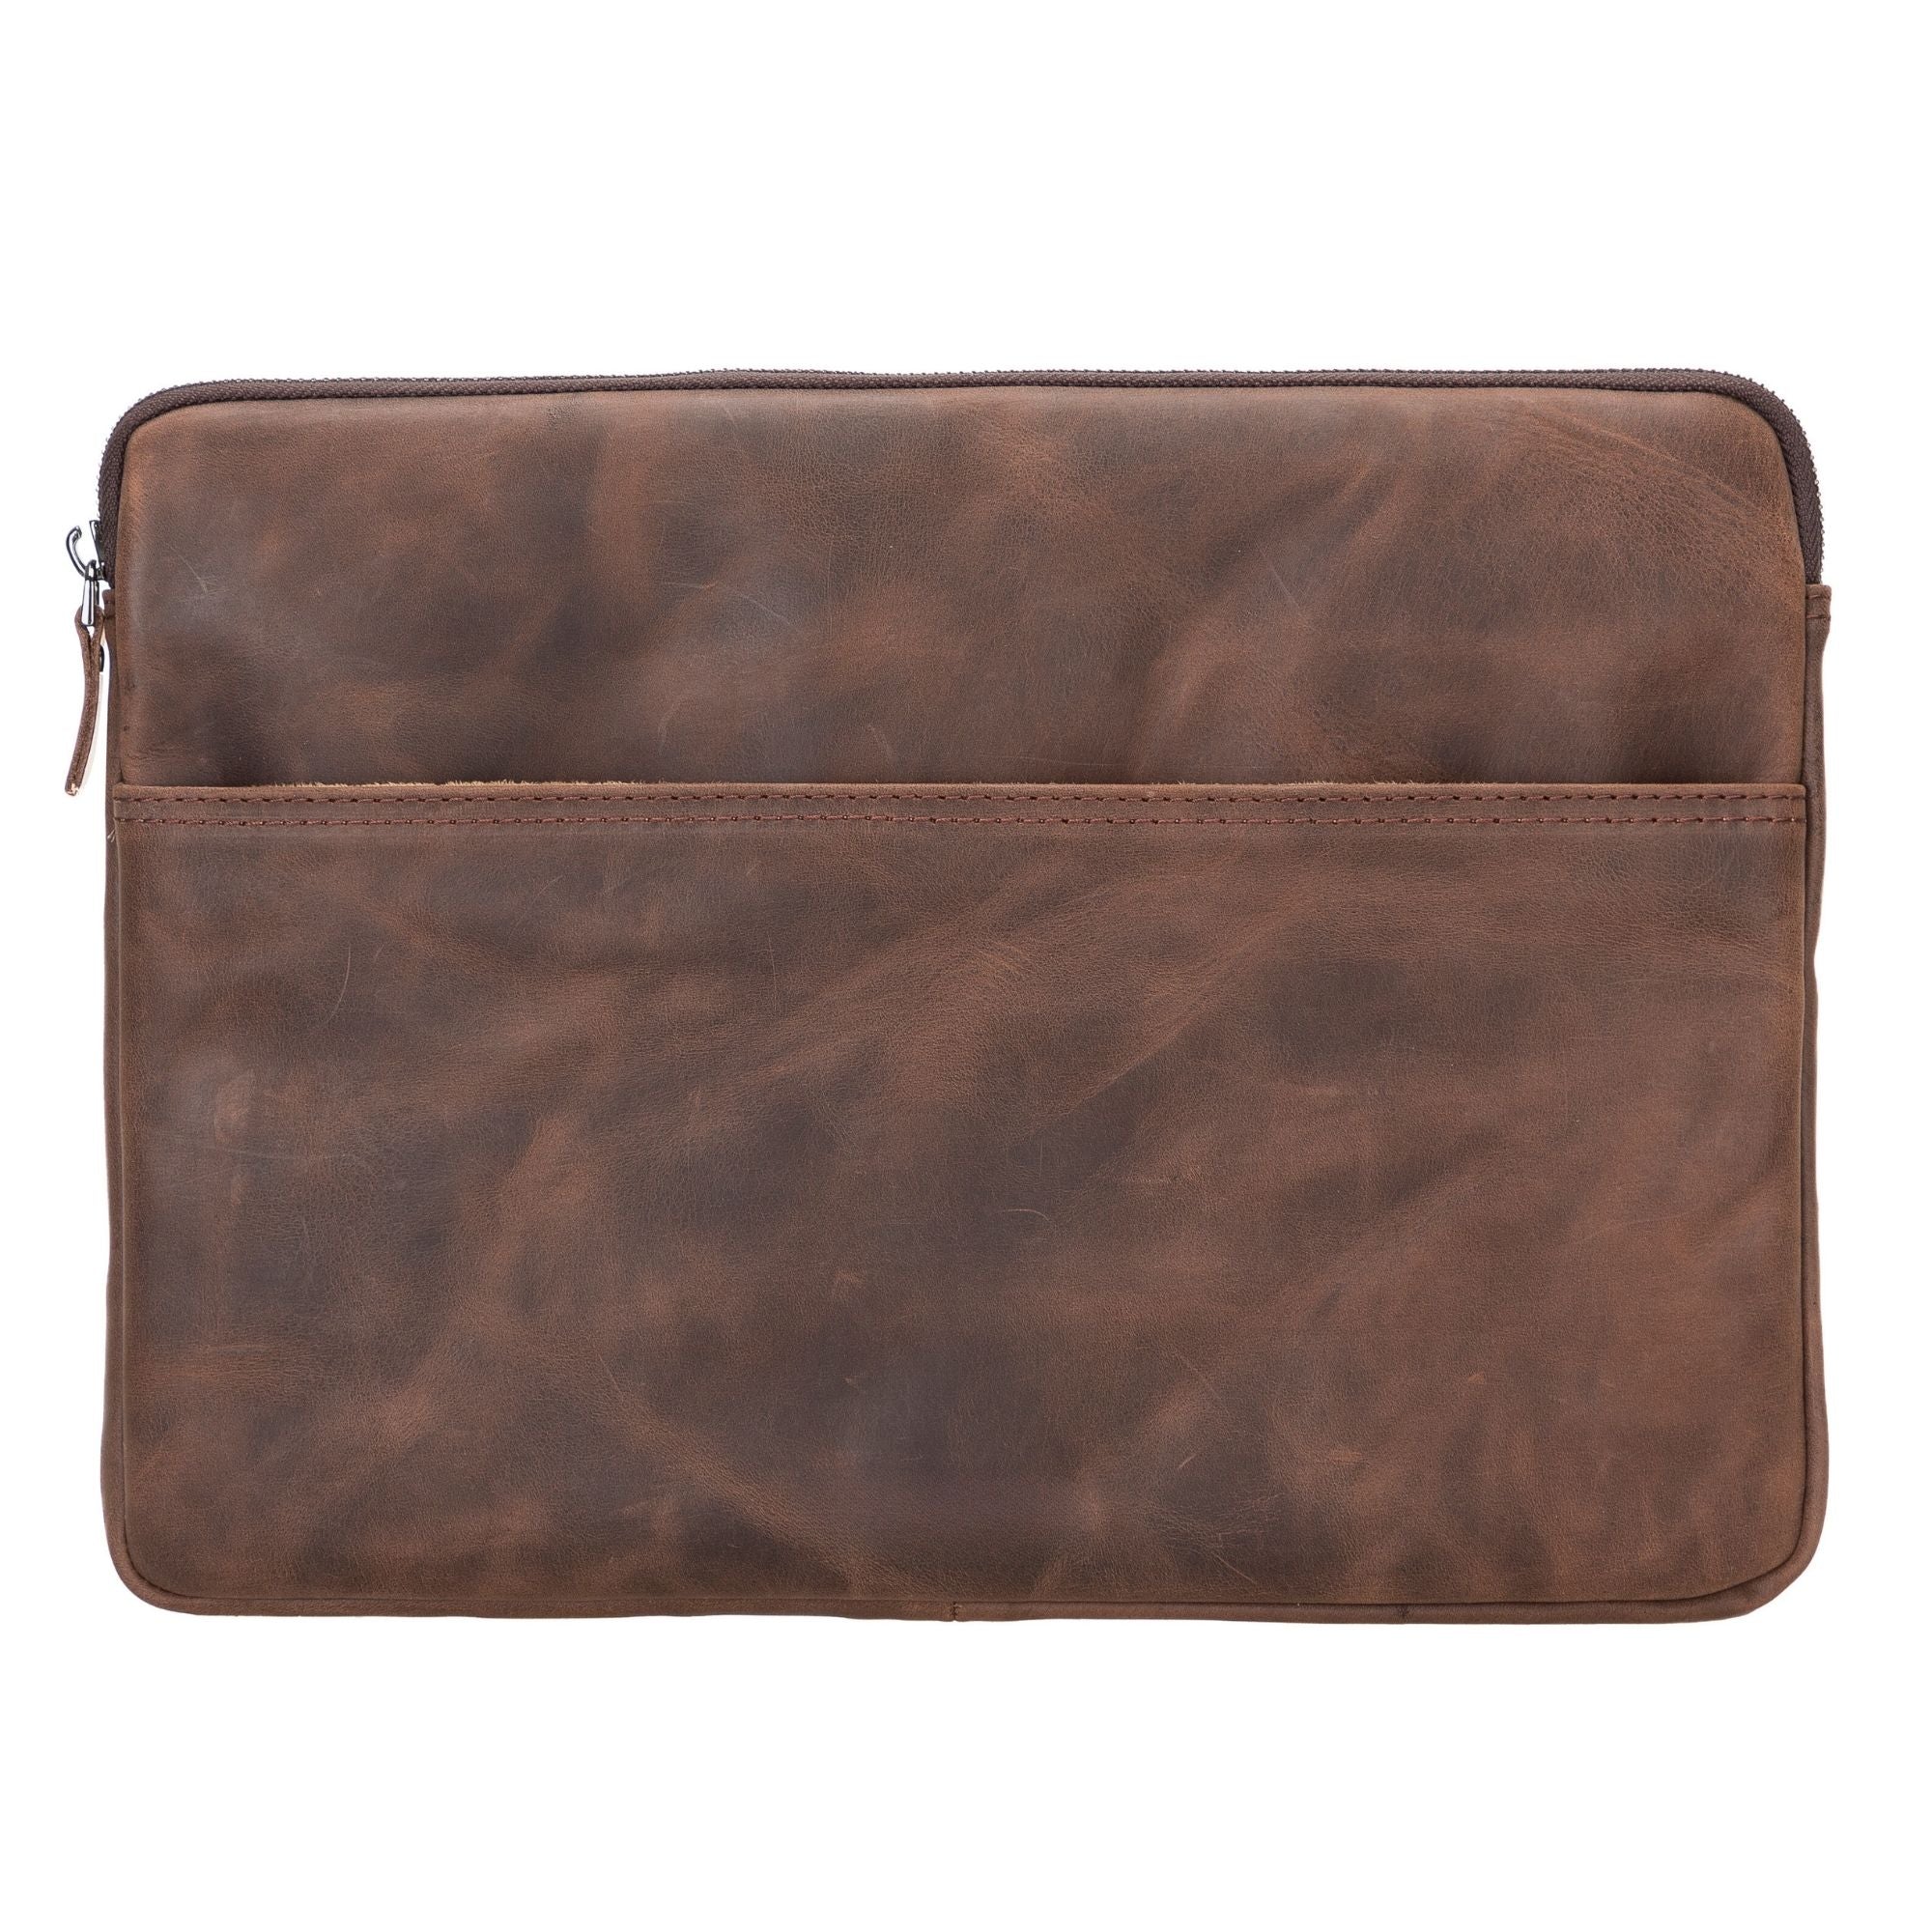 Kemmerer Leather Sleeve for iPad and MacBook - 11 Inches - Dark Brown - TORONATA